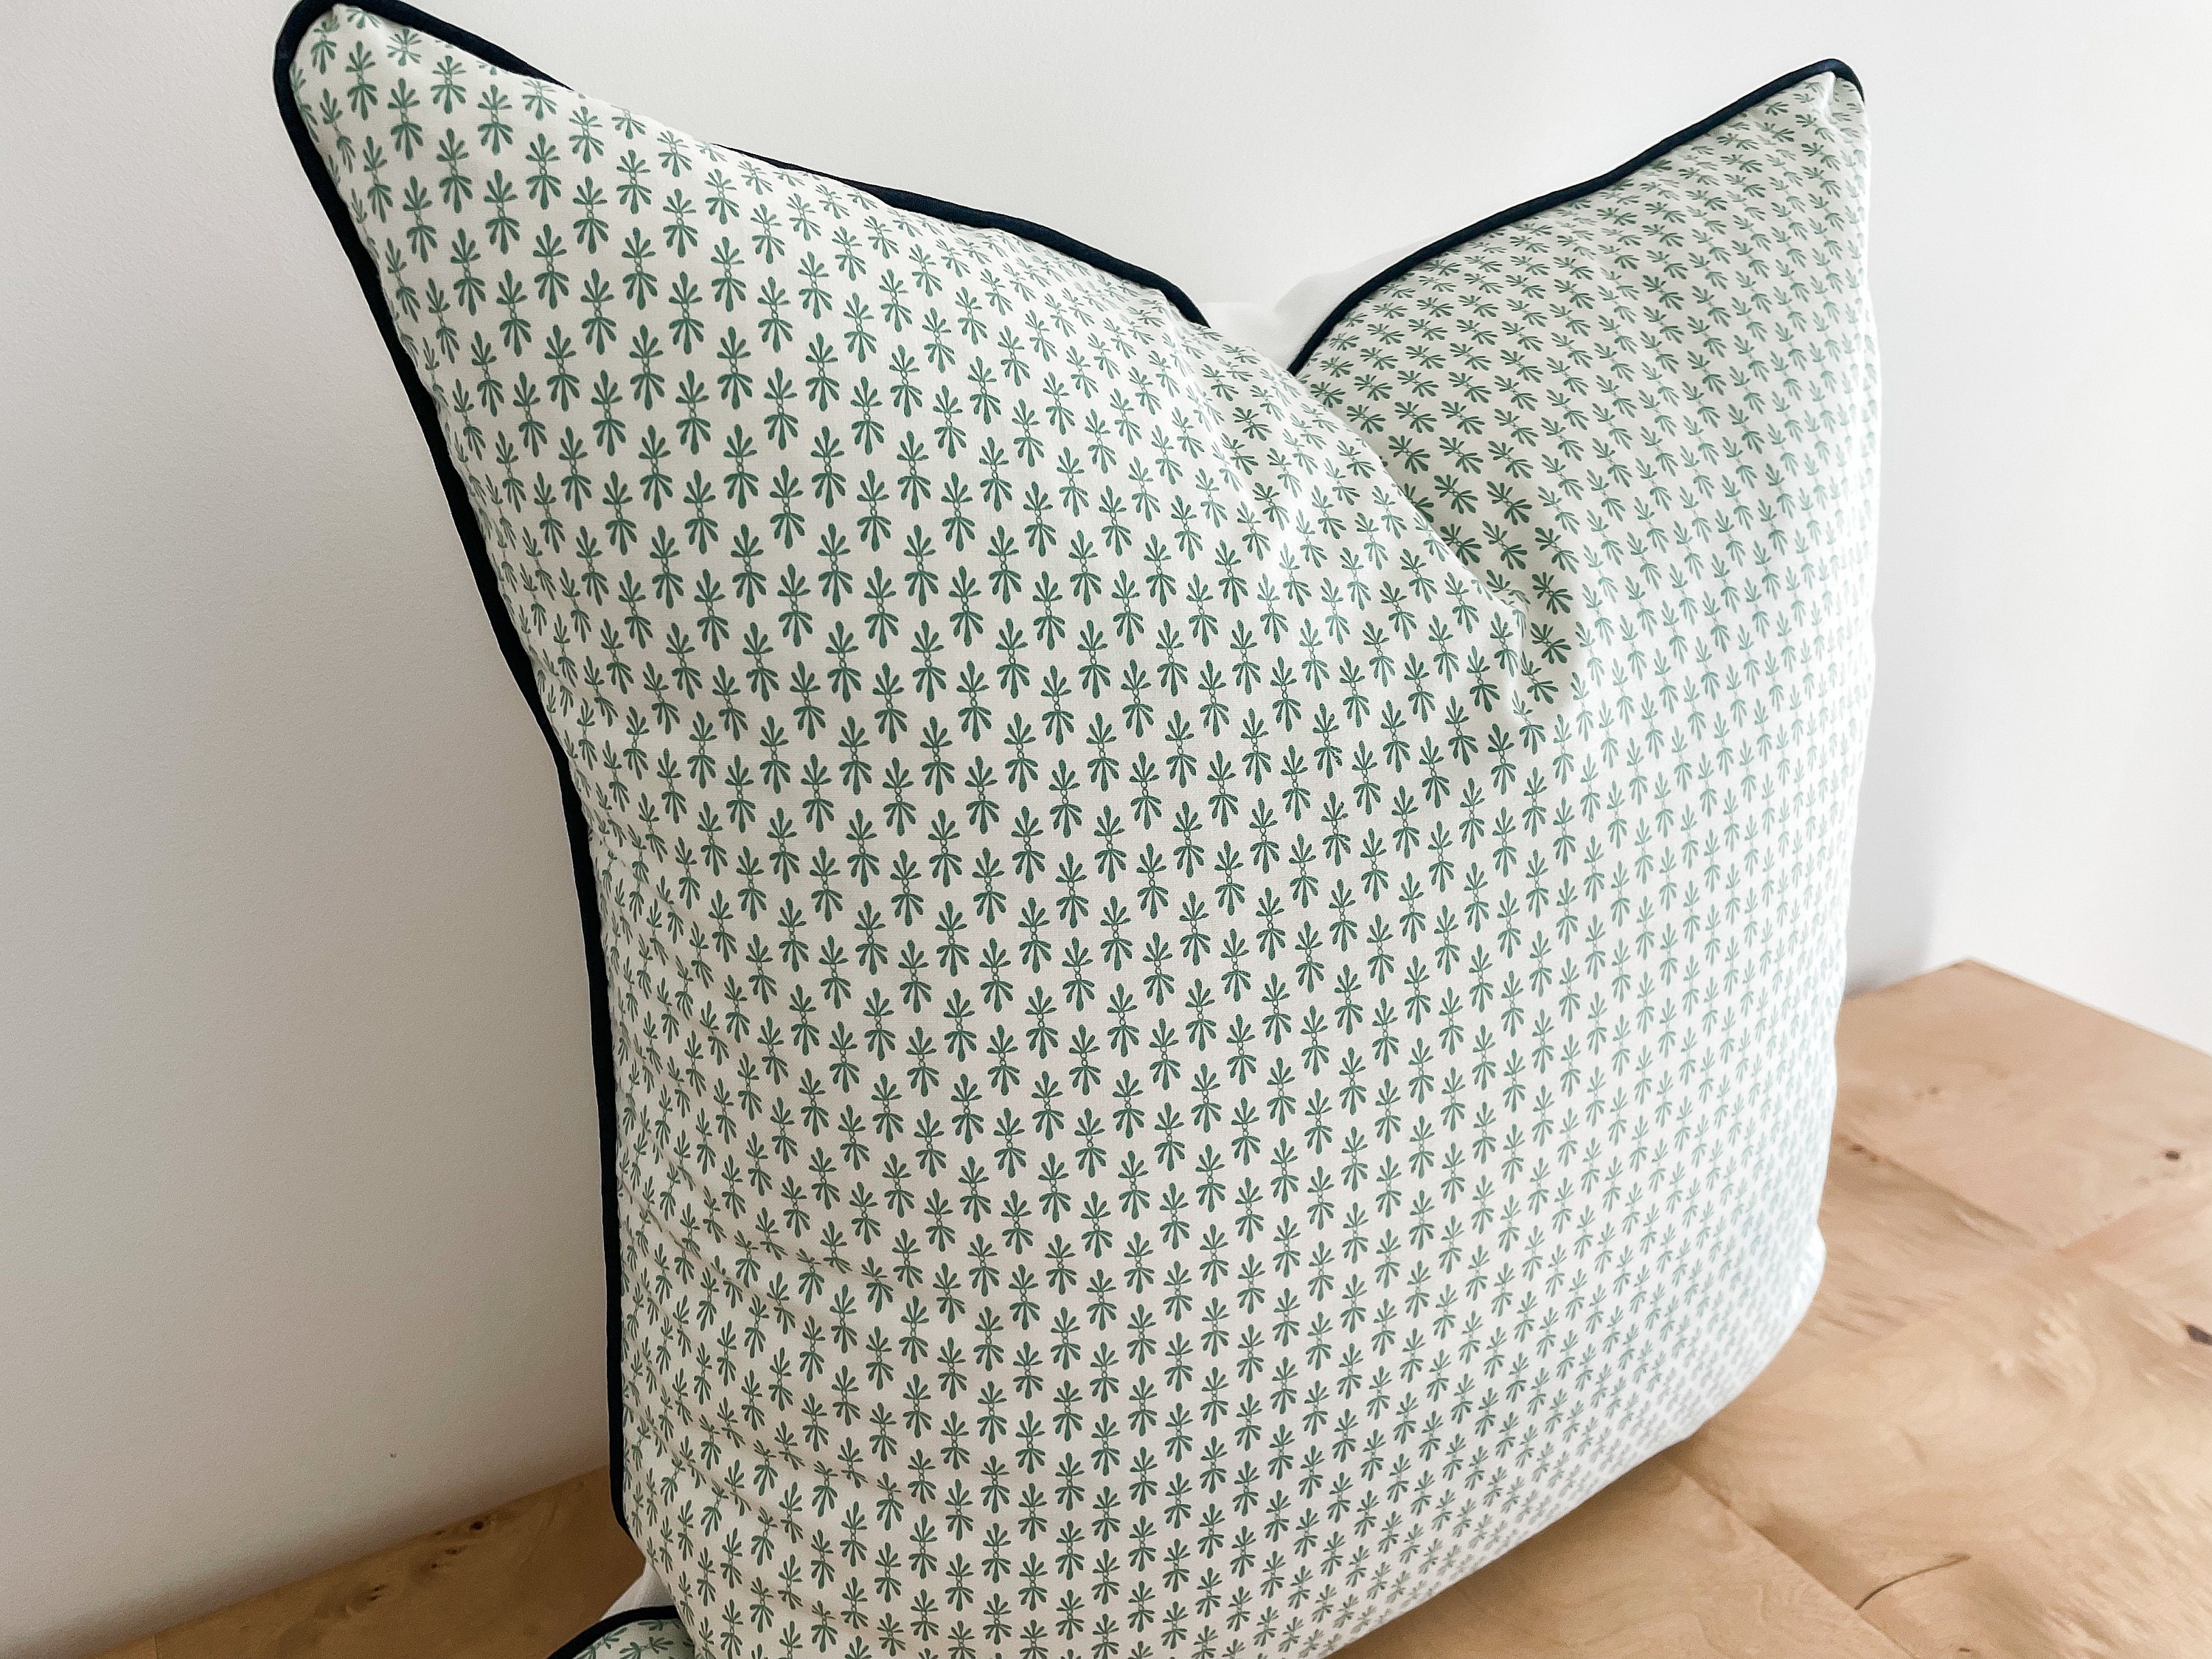 Geo Shapes Handcrafted Throw Pillow, Sage- 18x18 inch